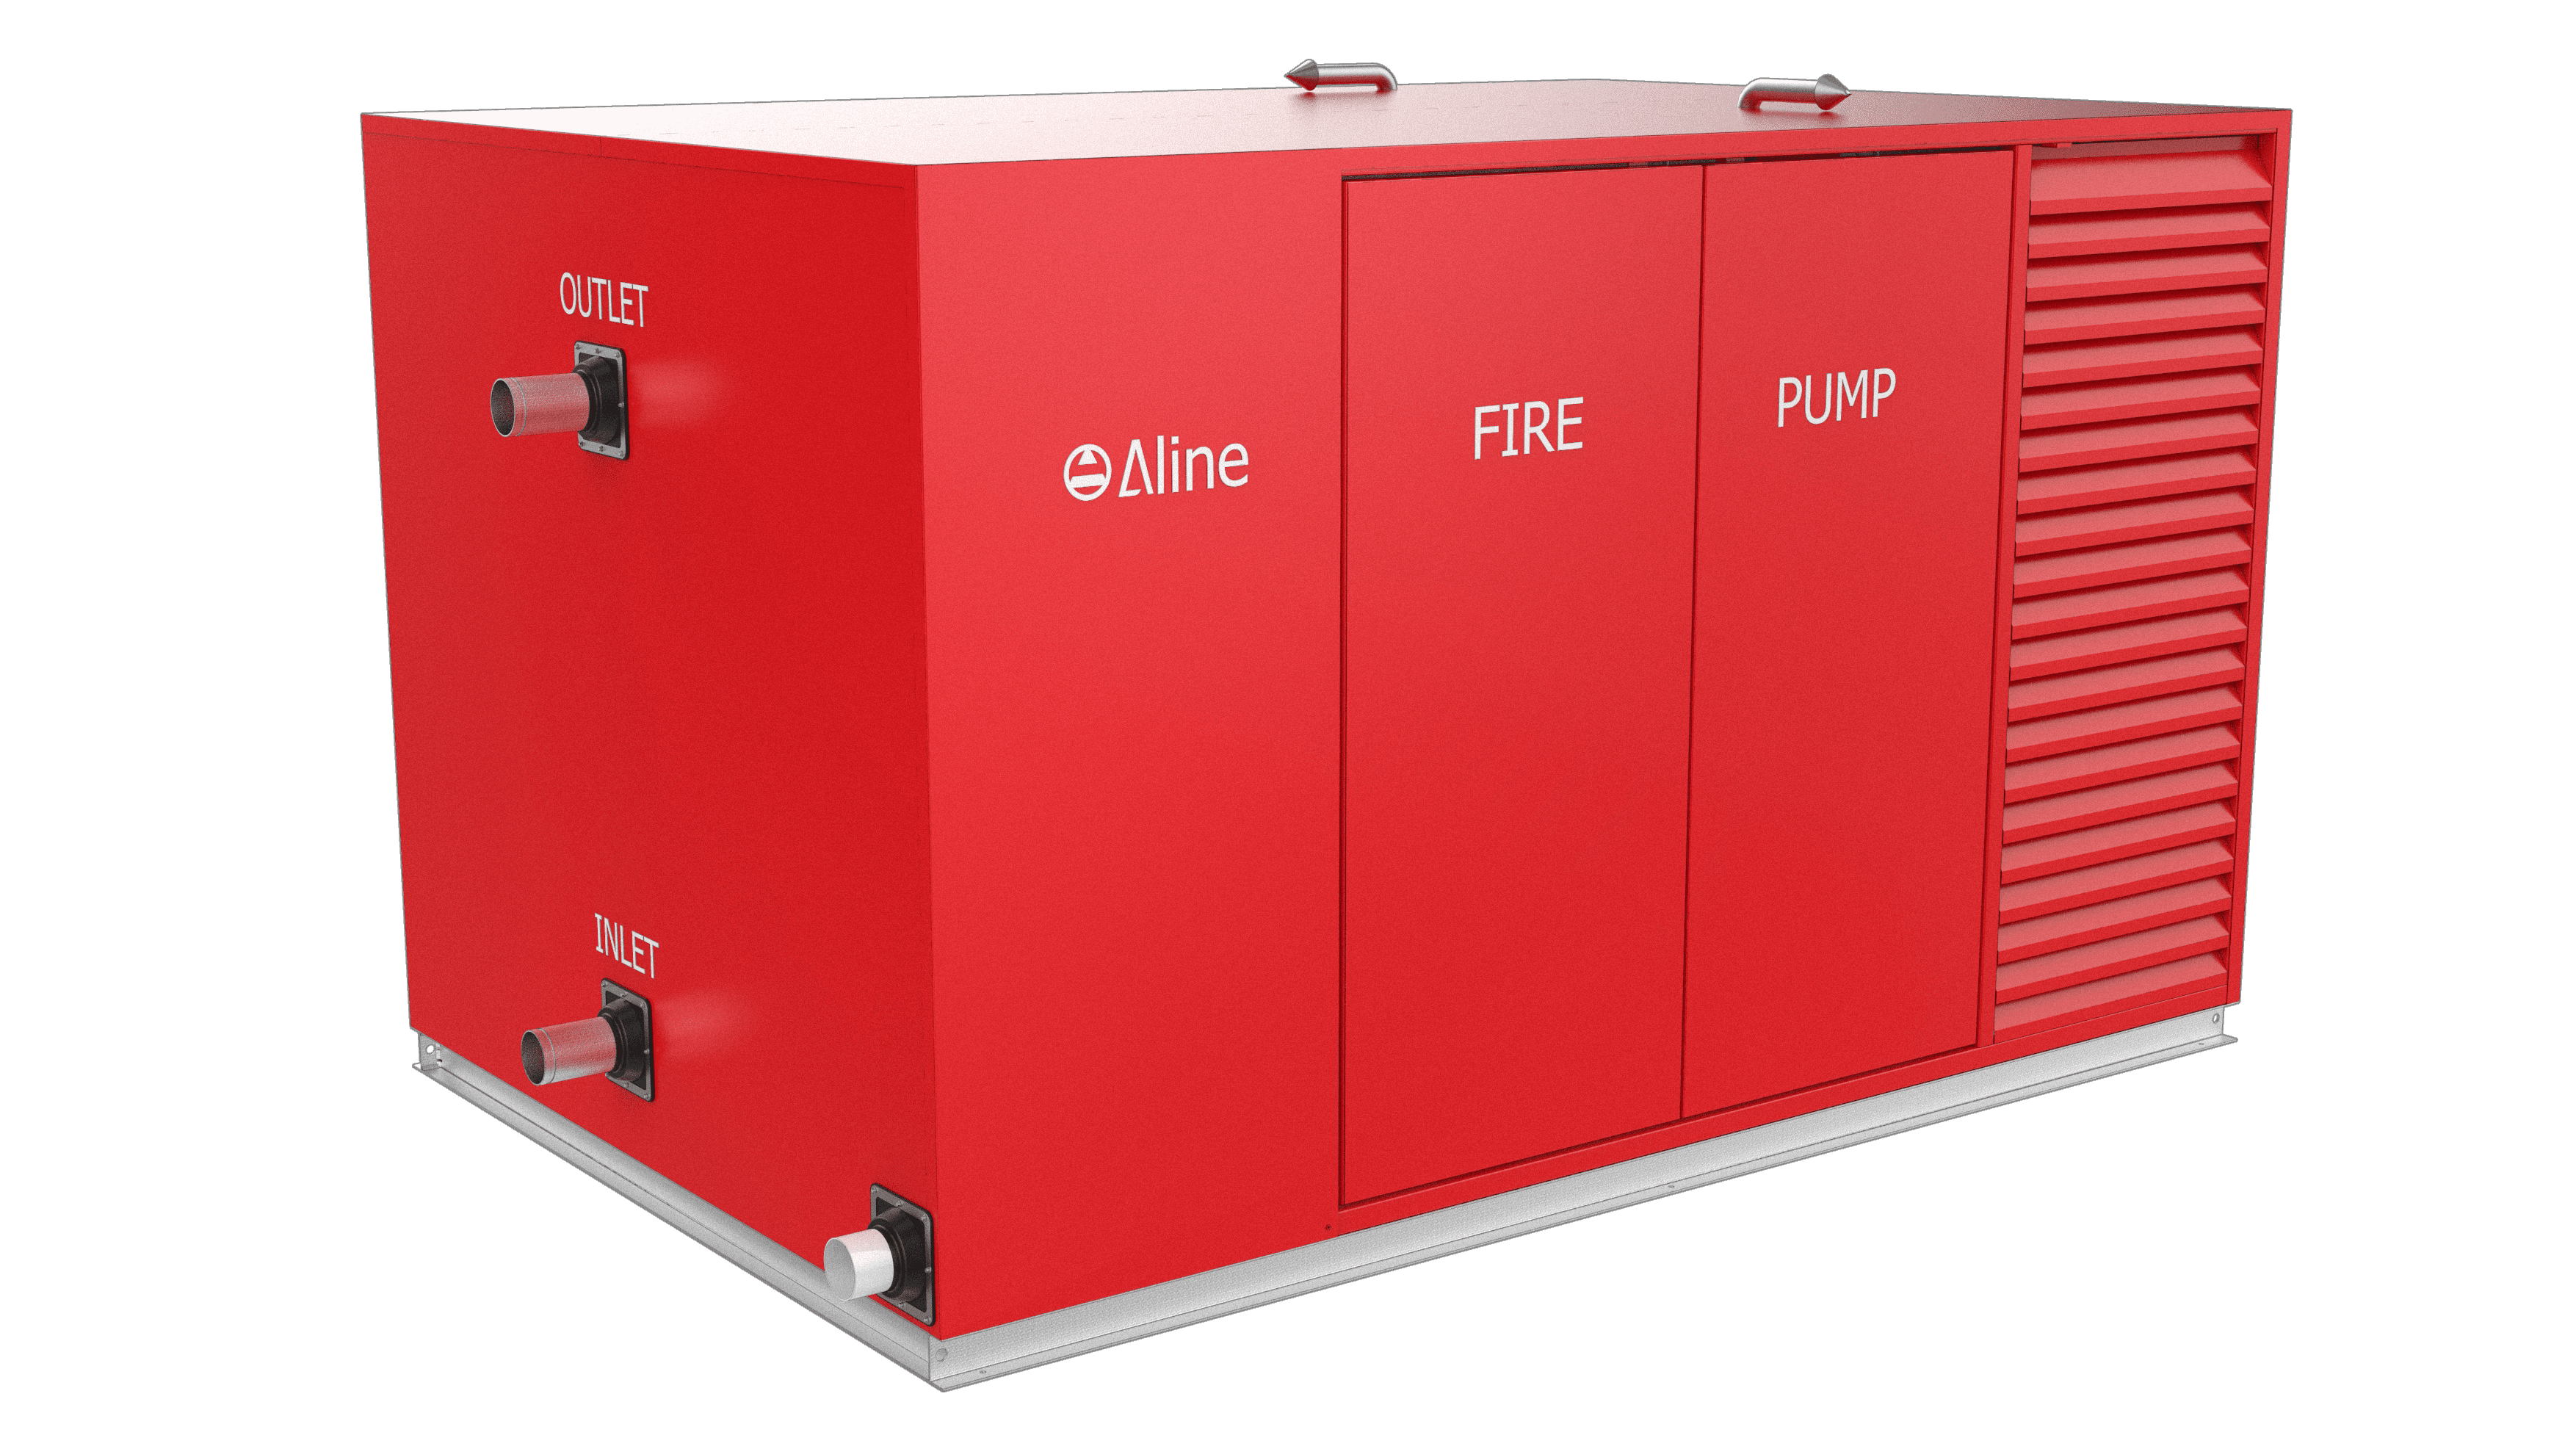 Dual enclosure fire pumpset for efficient fire water tank systems